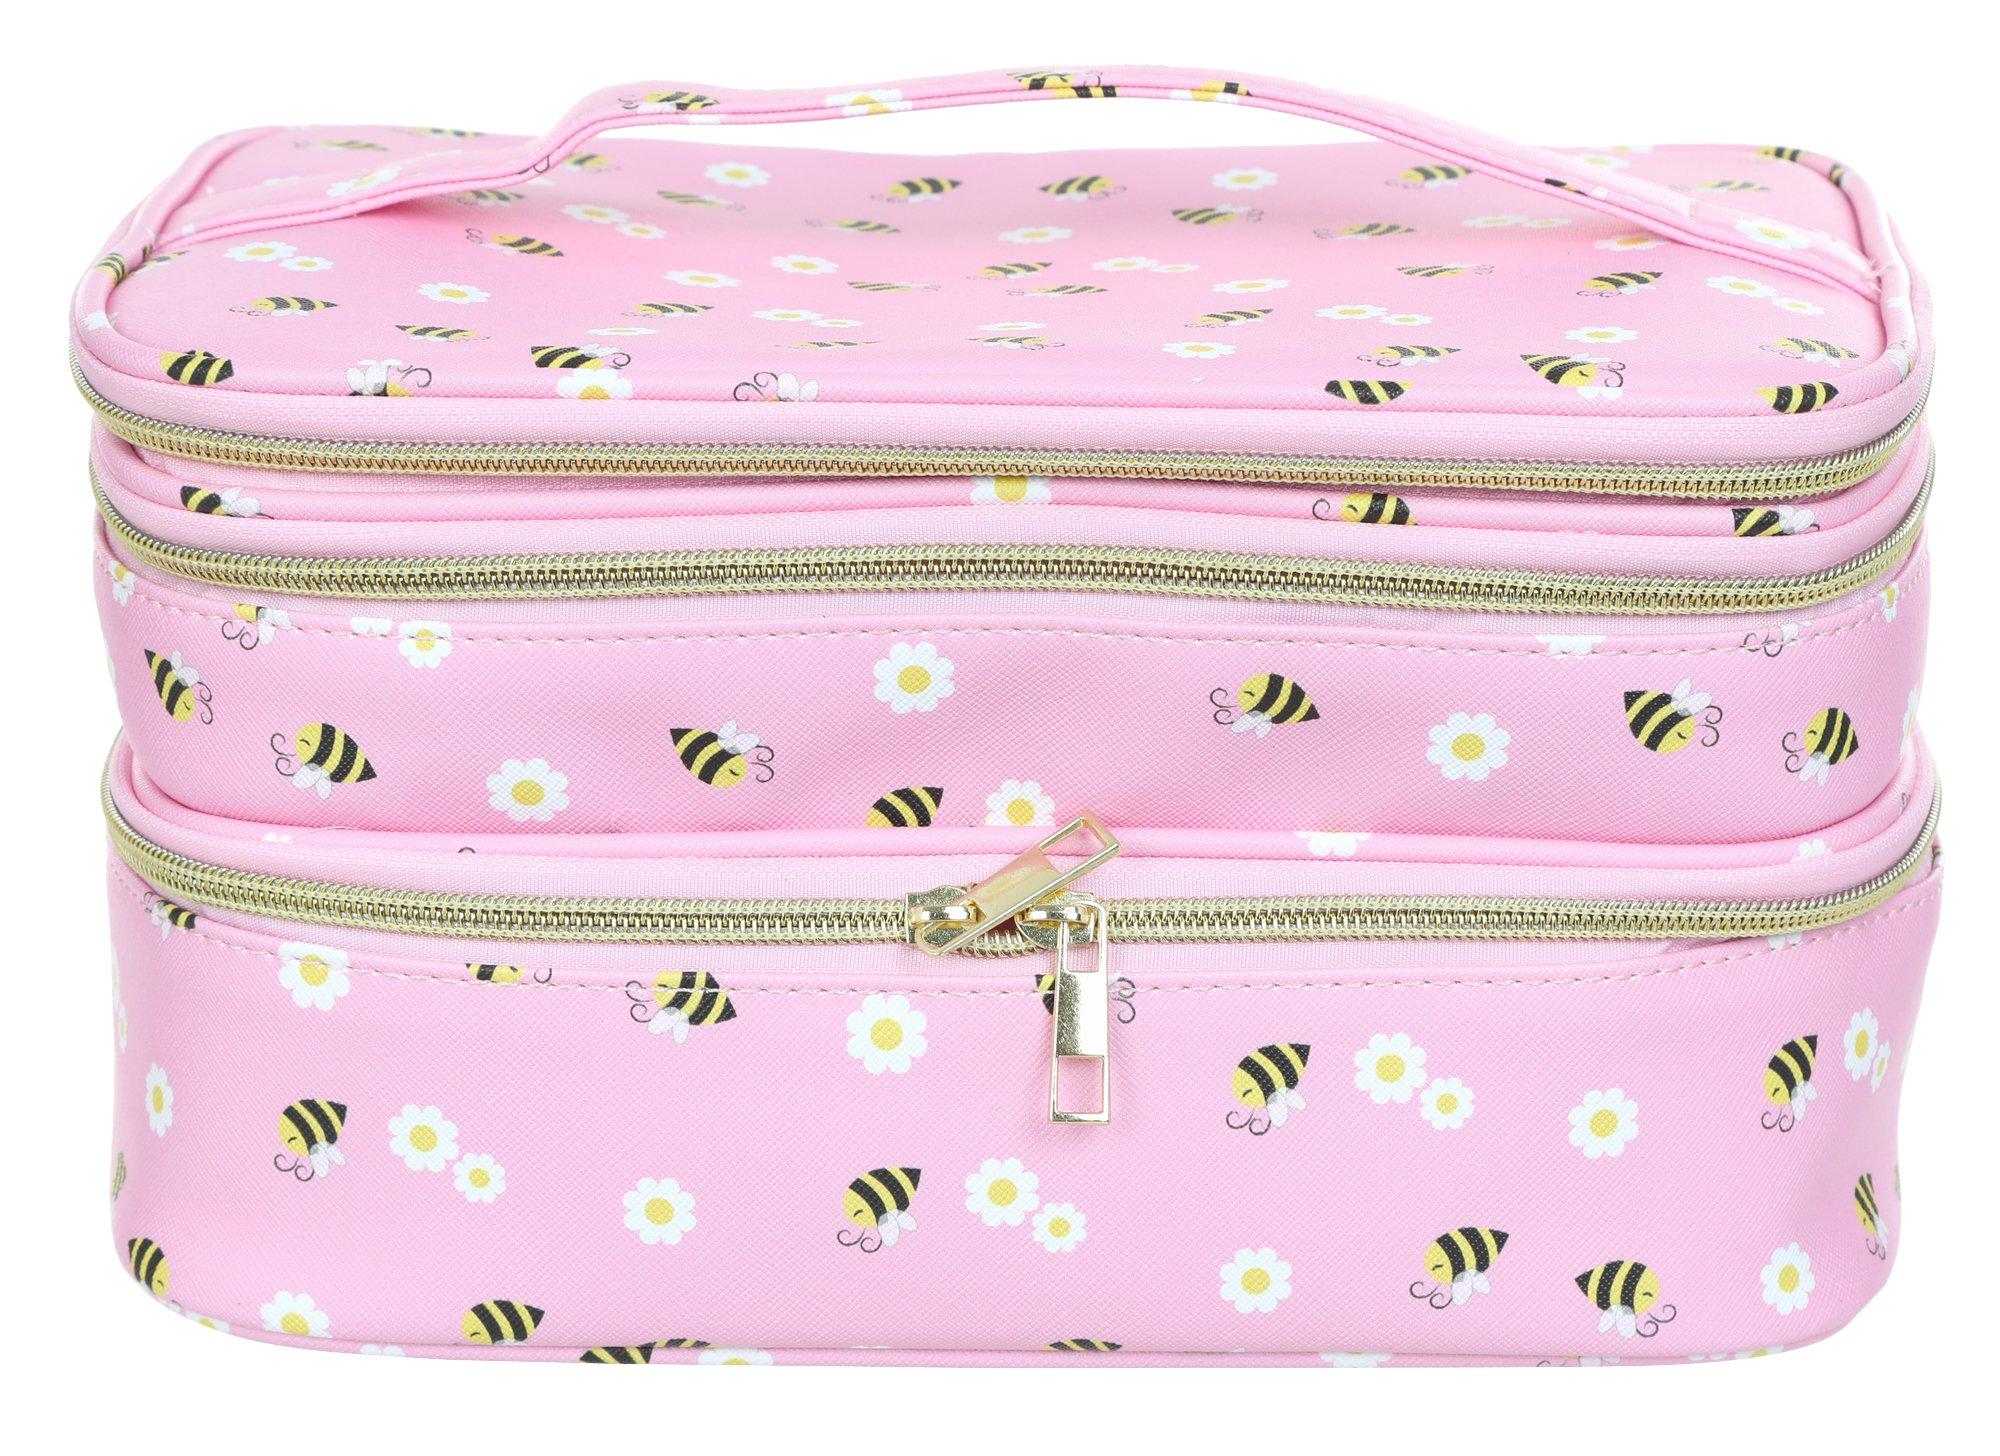 Triple Compartment Floral Cosmetic Case